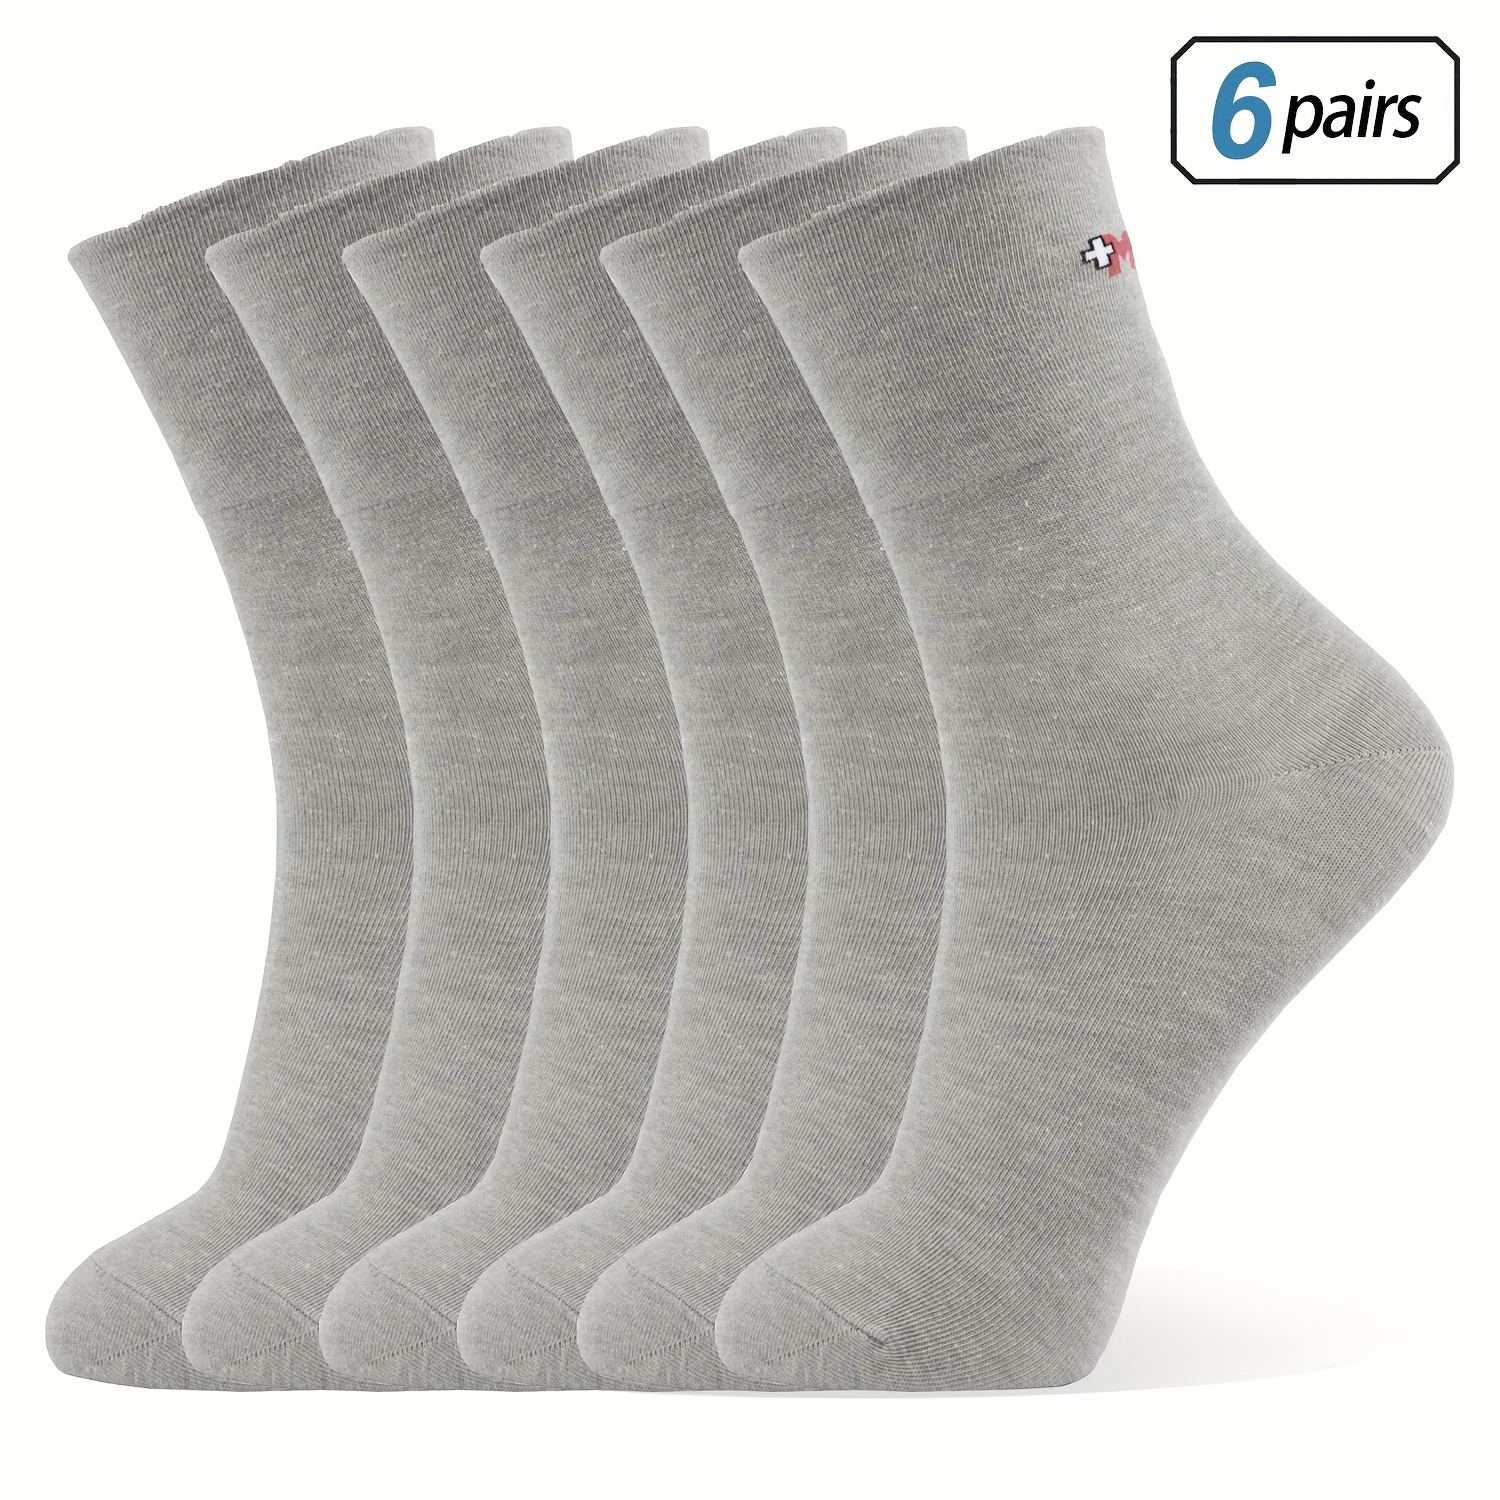 

6 Pairs Of Men's Cotton Blend Solid Color Crew Socks, Comfy & Breathable Anti-odor Socks For Daily And Outdoor Wearing